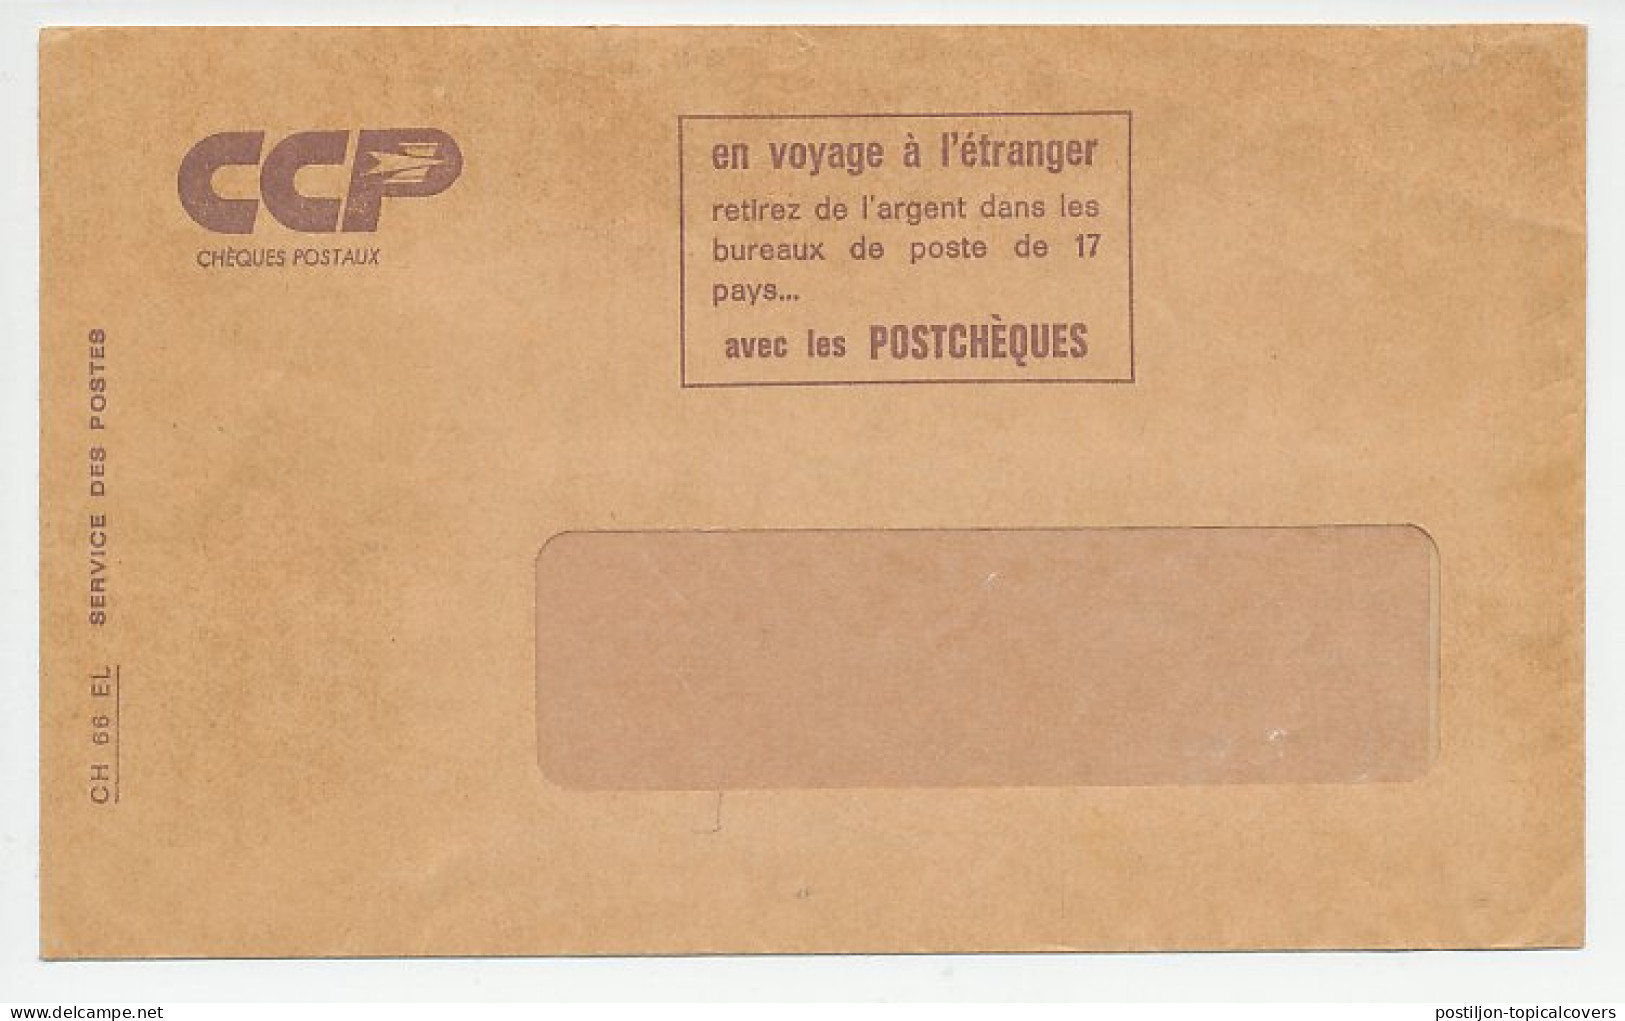 Postal Cheque Cover France Photographic Film - Photographie